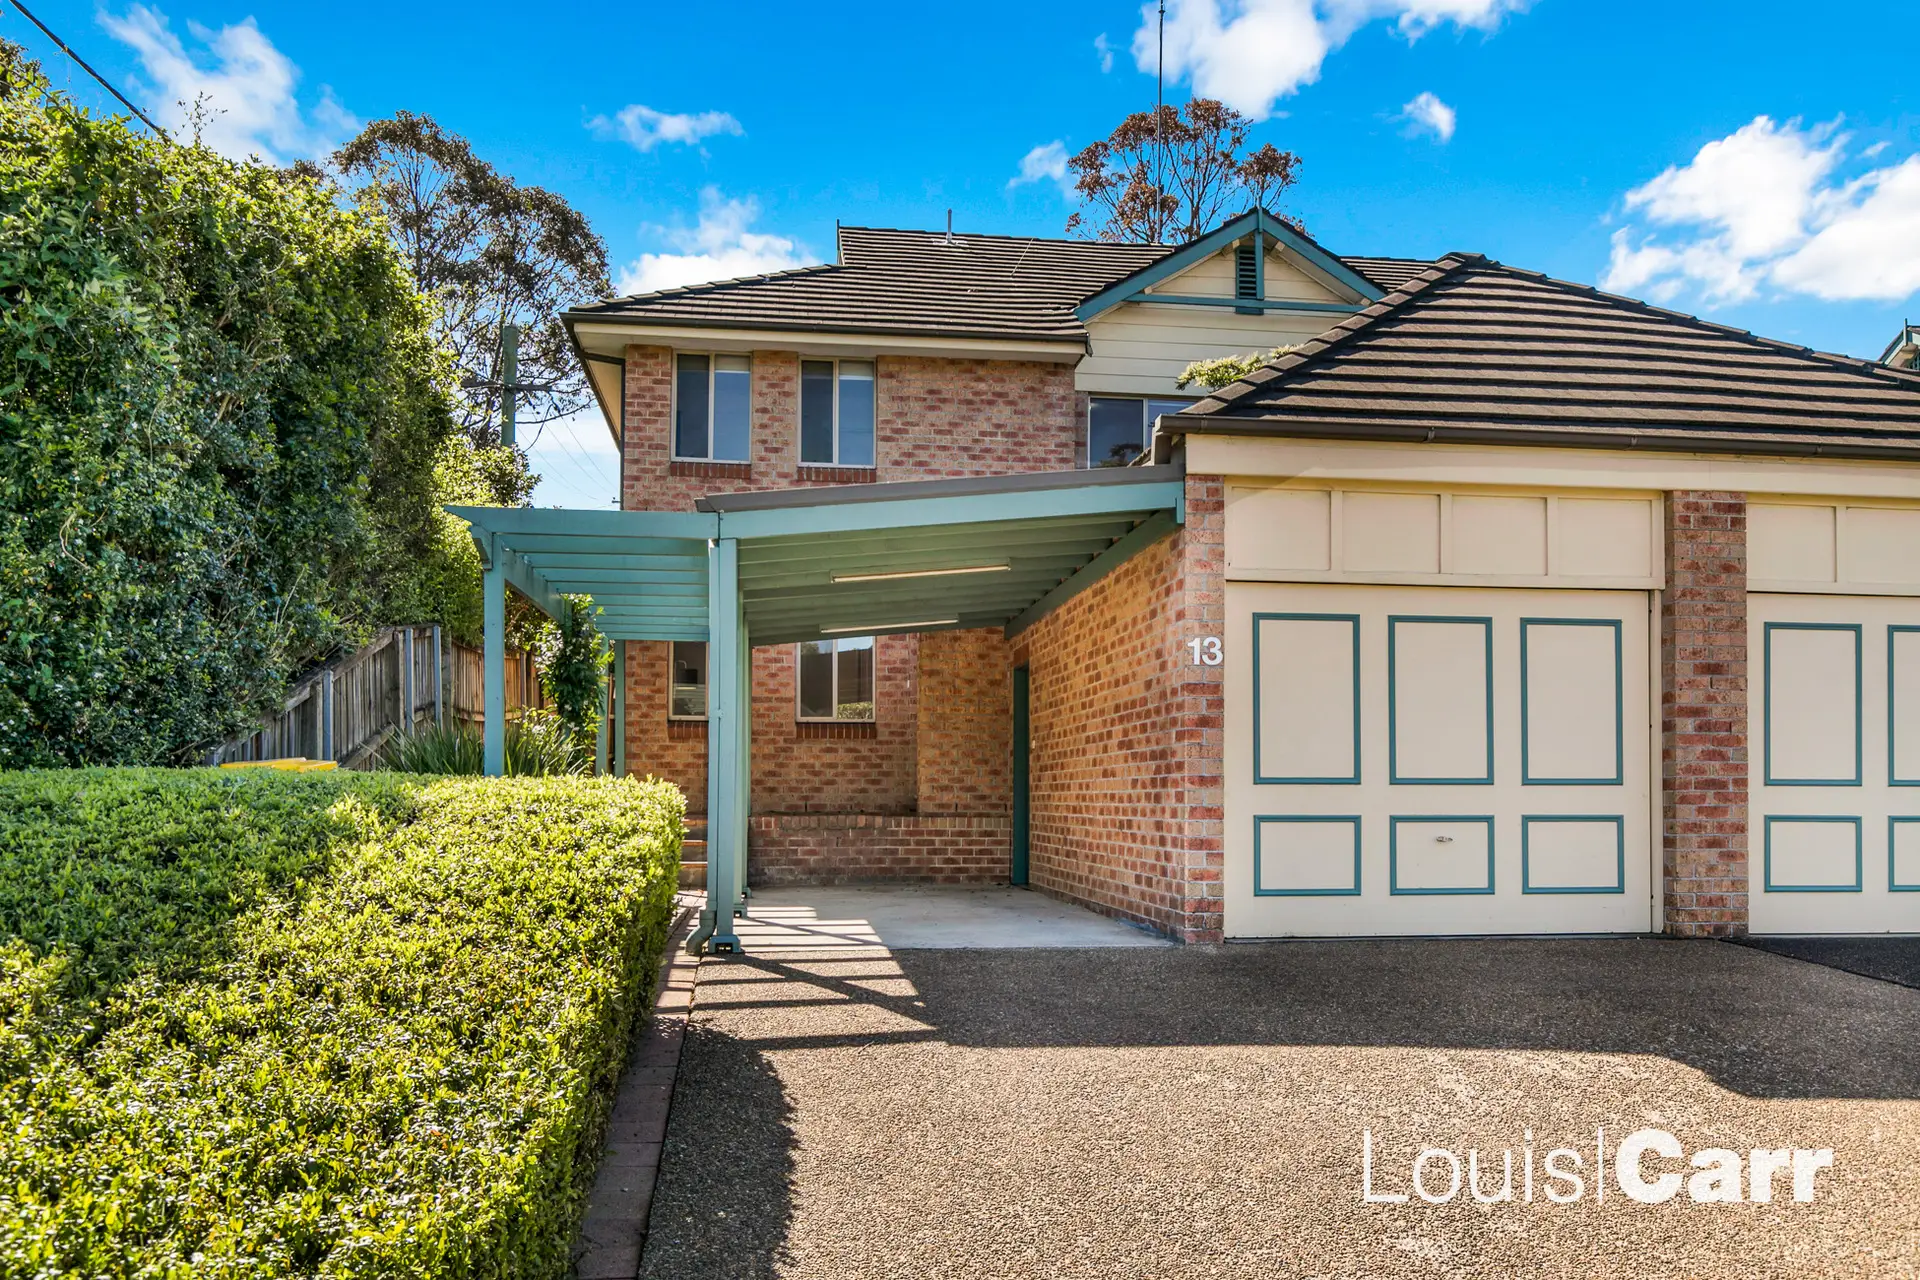 Photo #1: 13/29 Haven Court, Cherrybrook - Sold by Louis Carr Real Estate